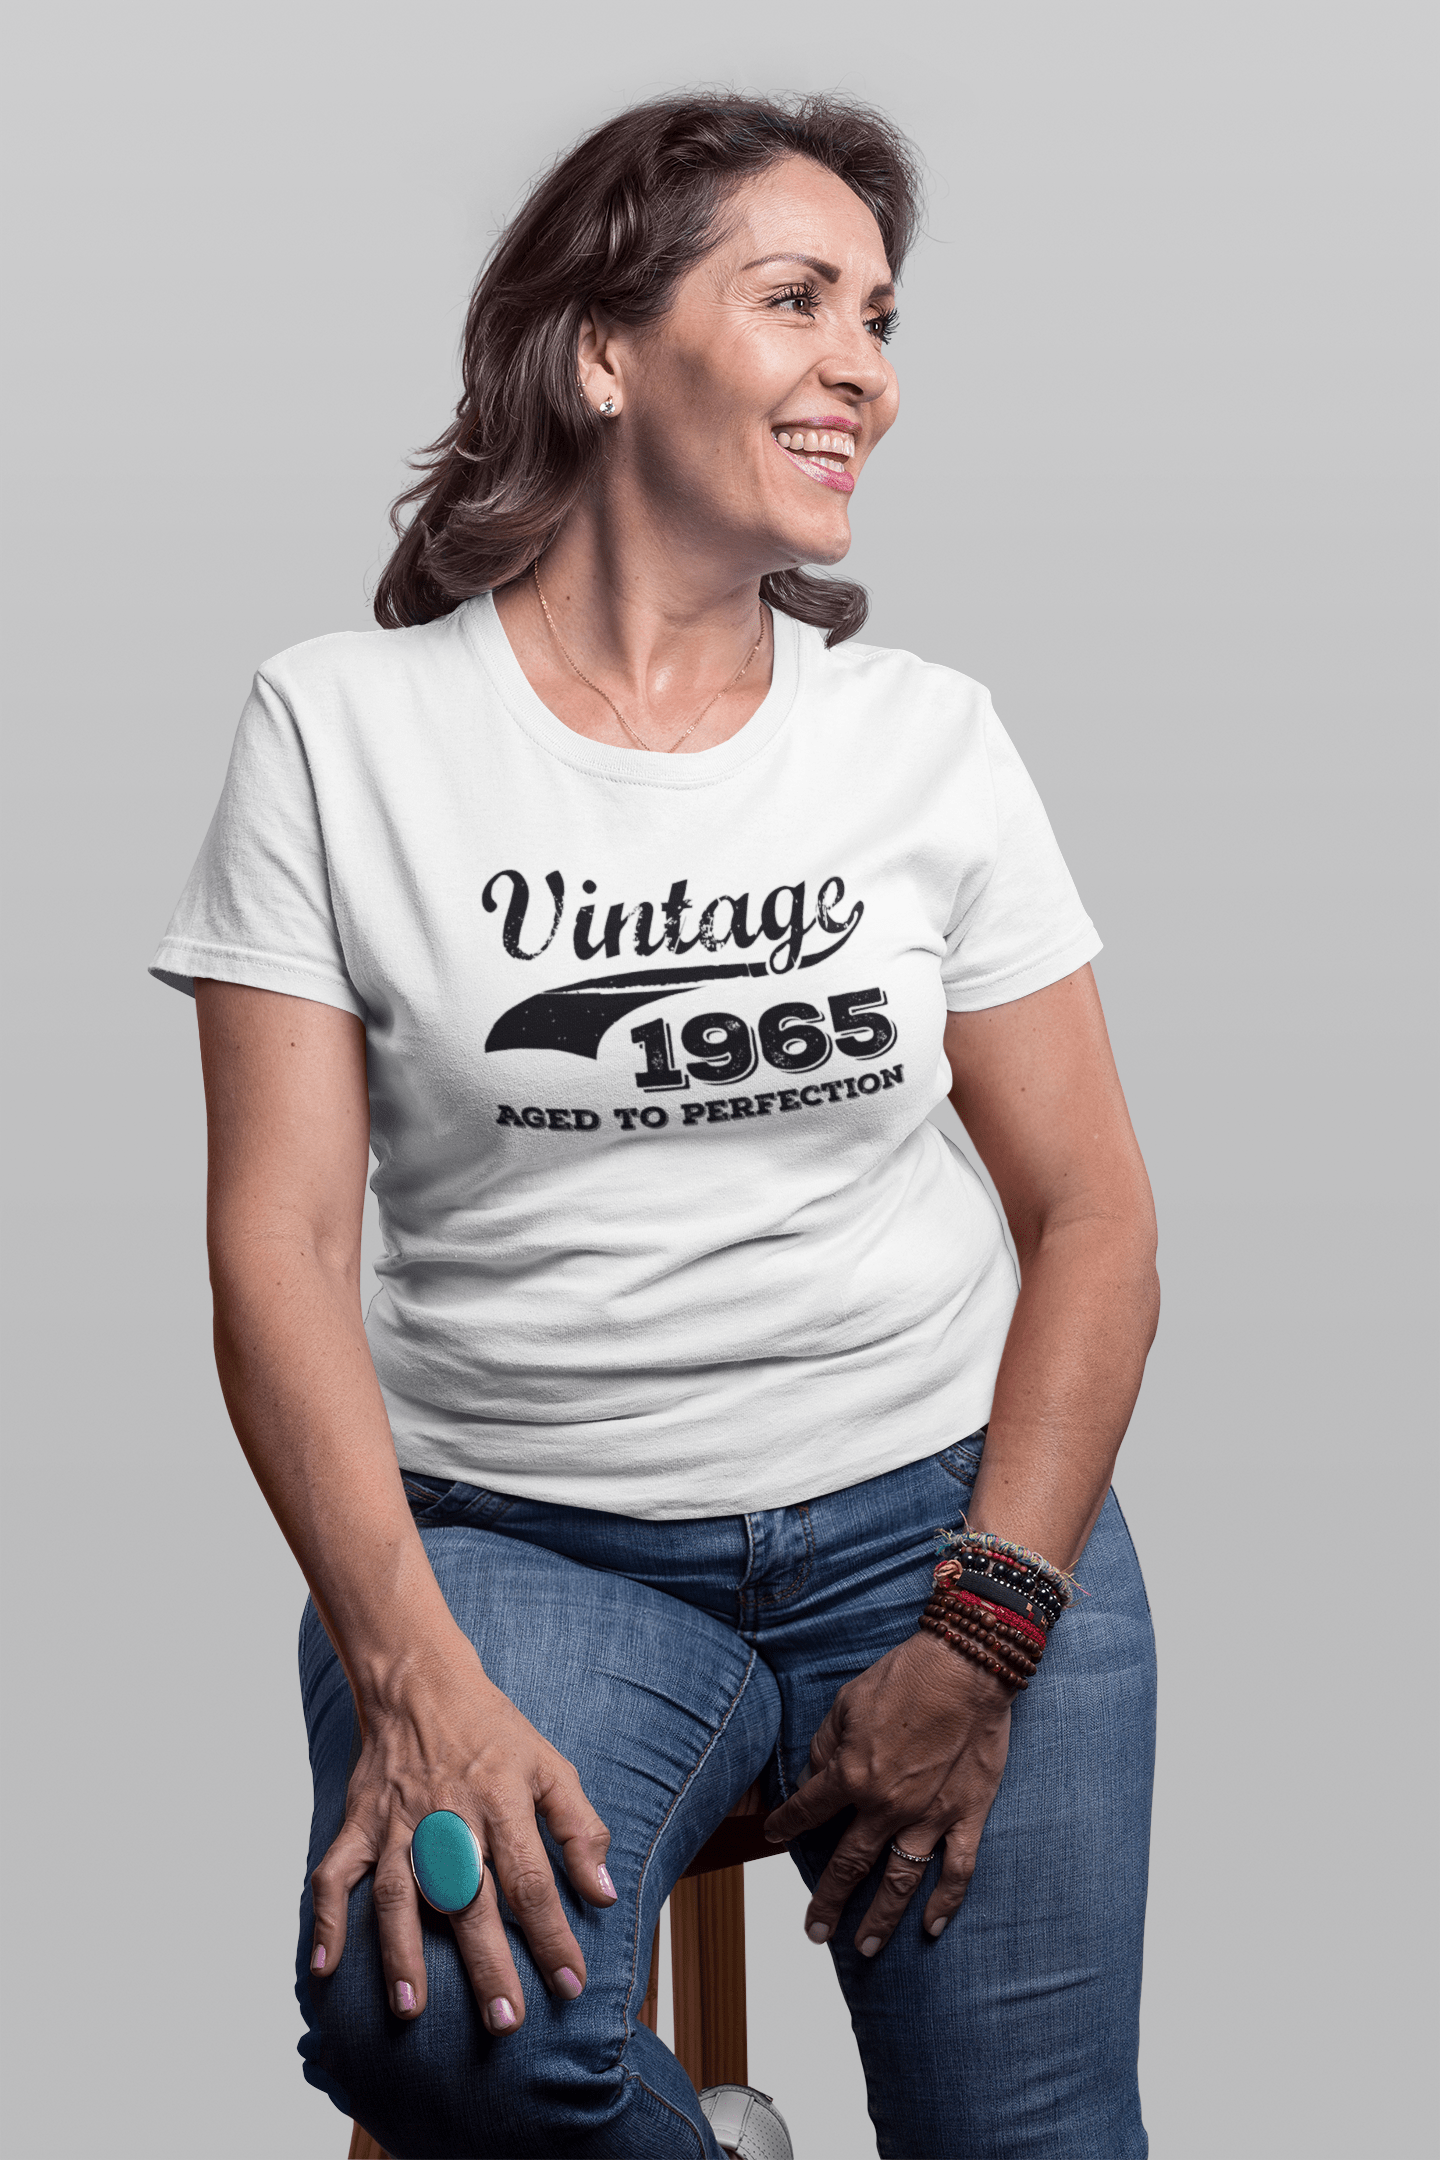 Vintage Aged To Perfection 1965, White, Women's Short Sleeve Round Neck T-shirt, gift t-shirt 00344